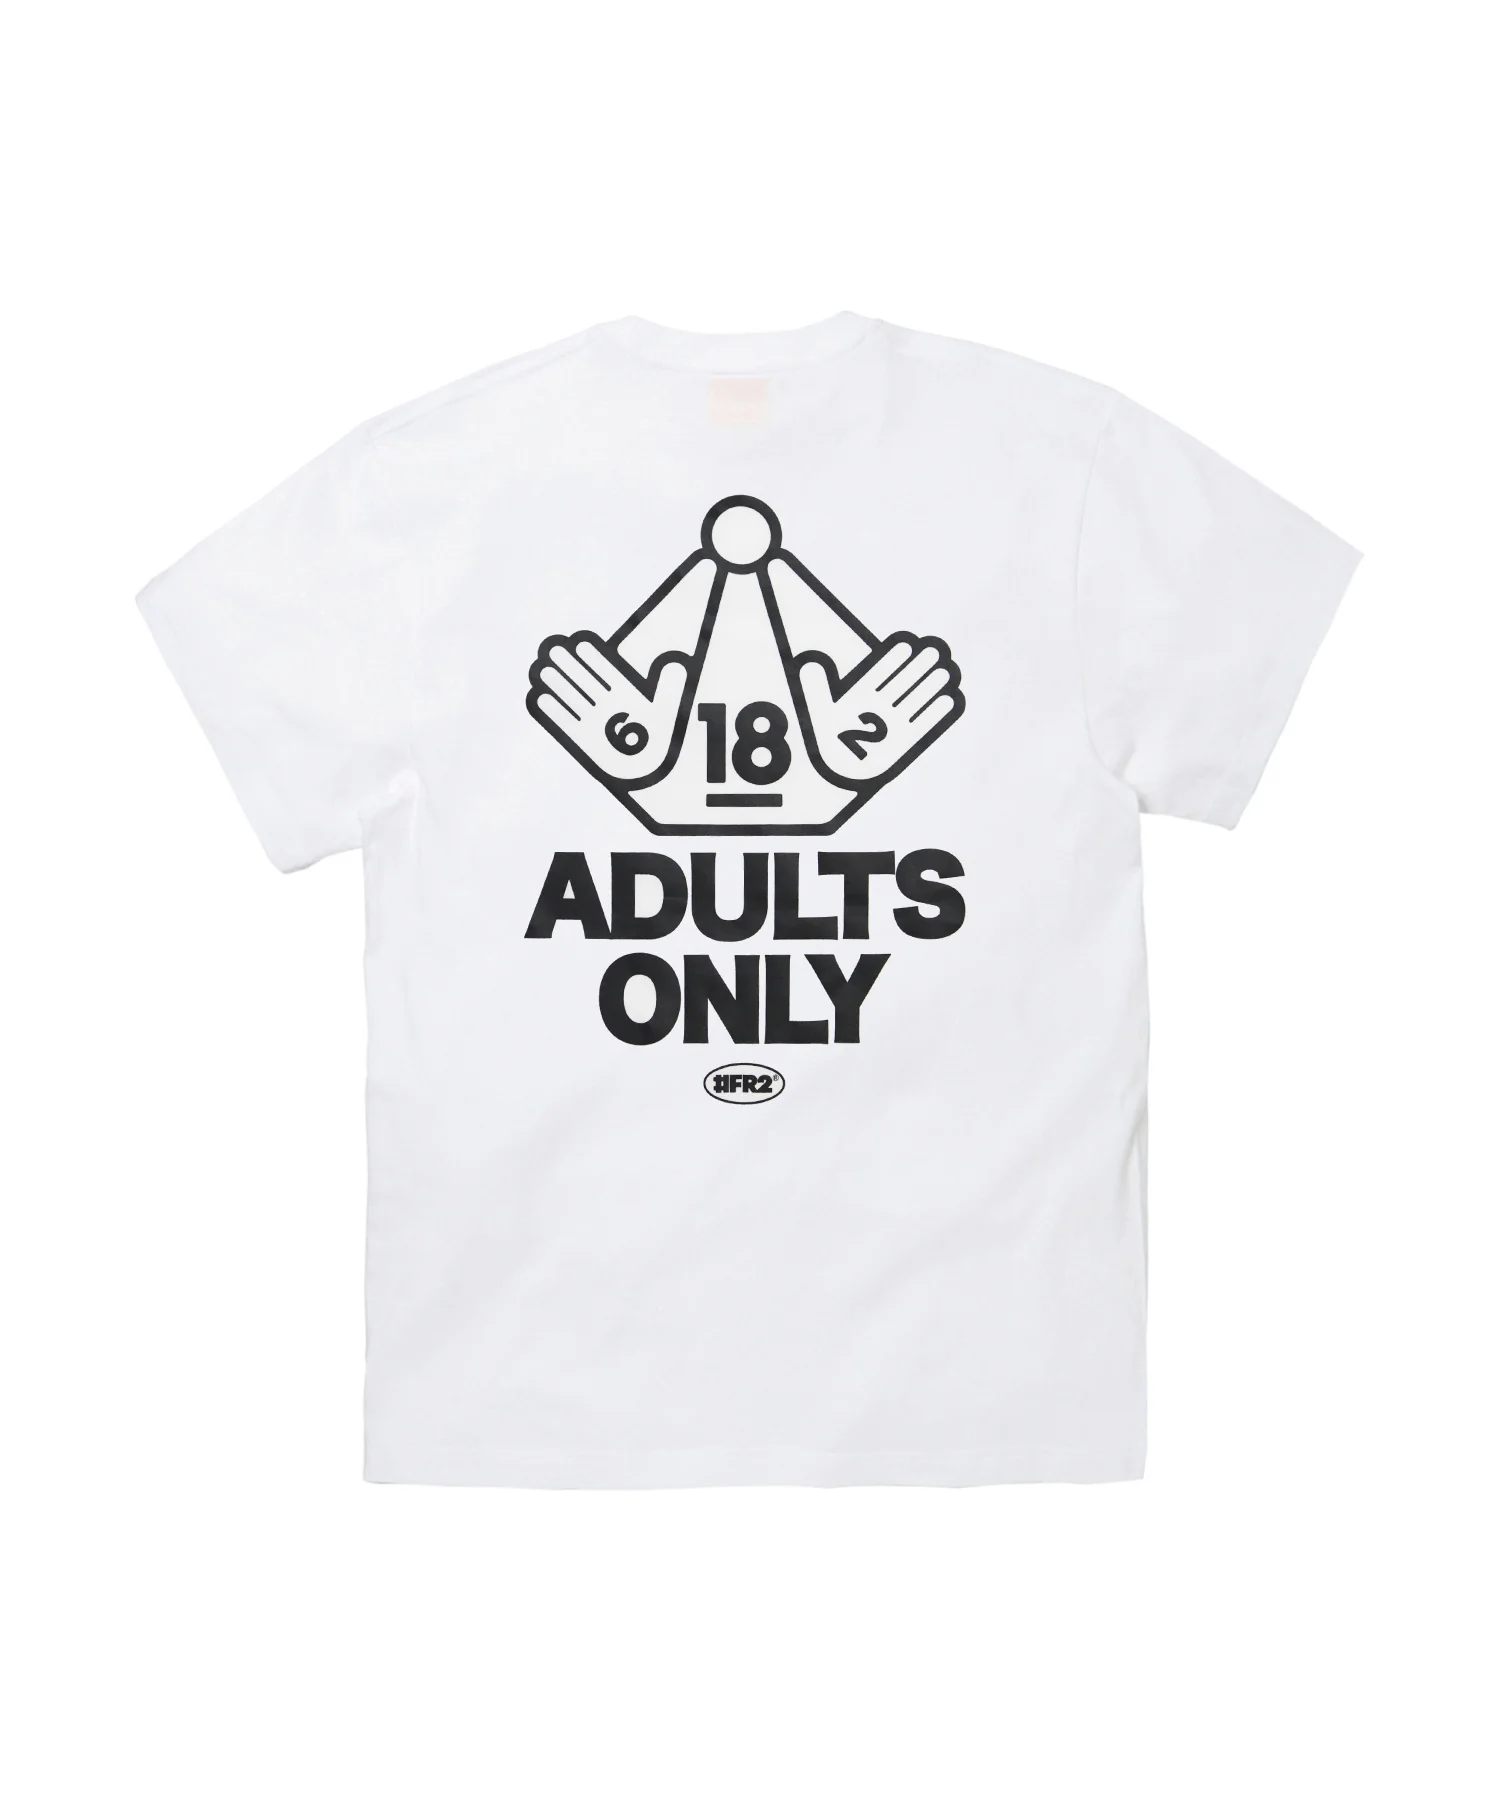 6182 ADULTS ONLY T-shirt[FRC3025]